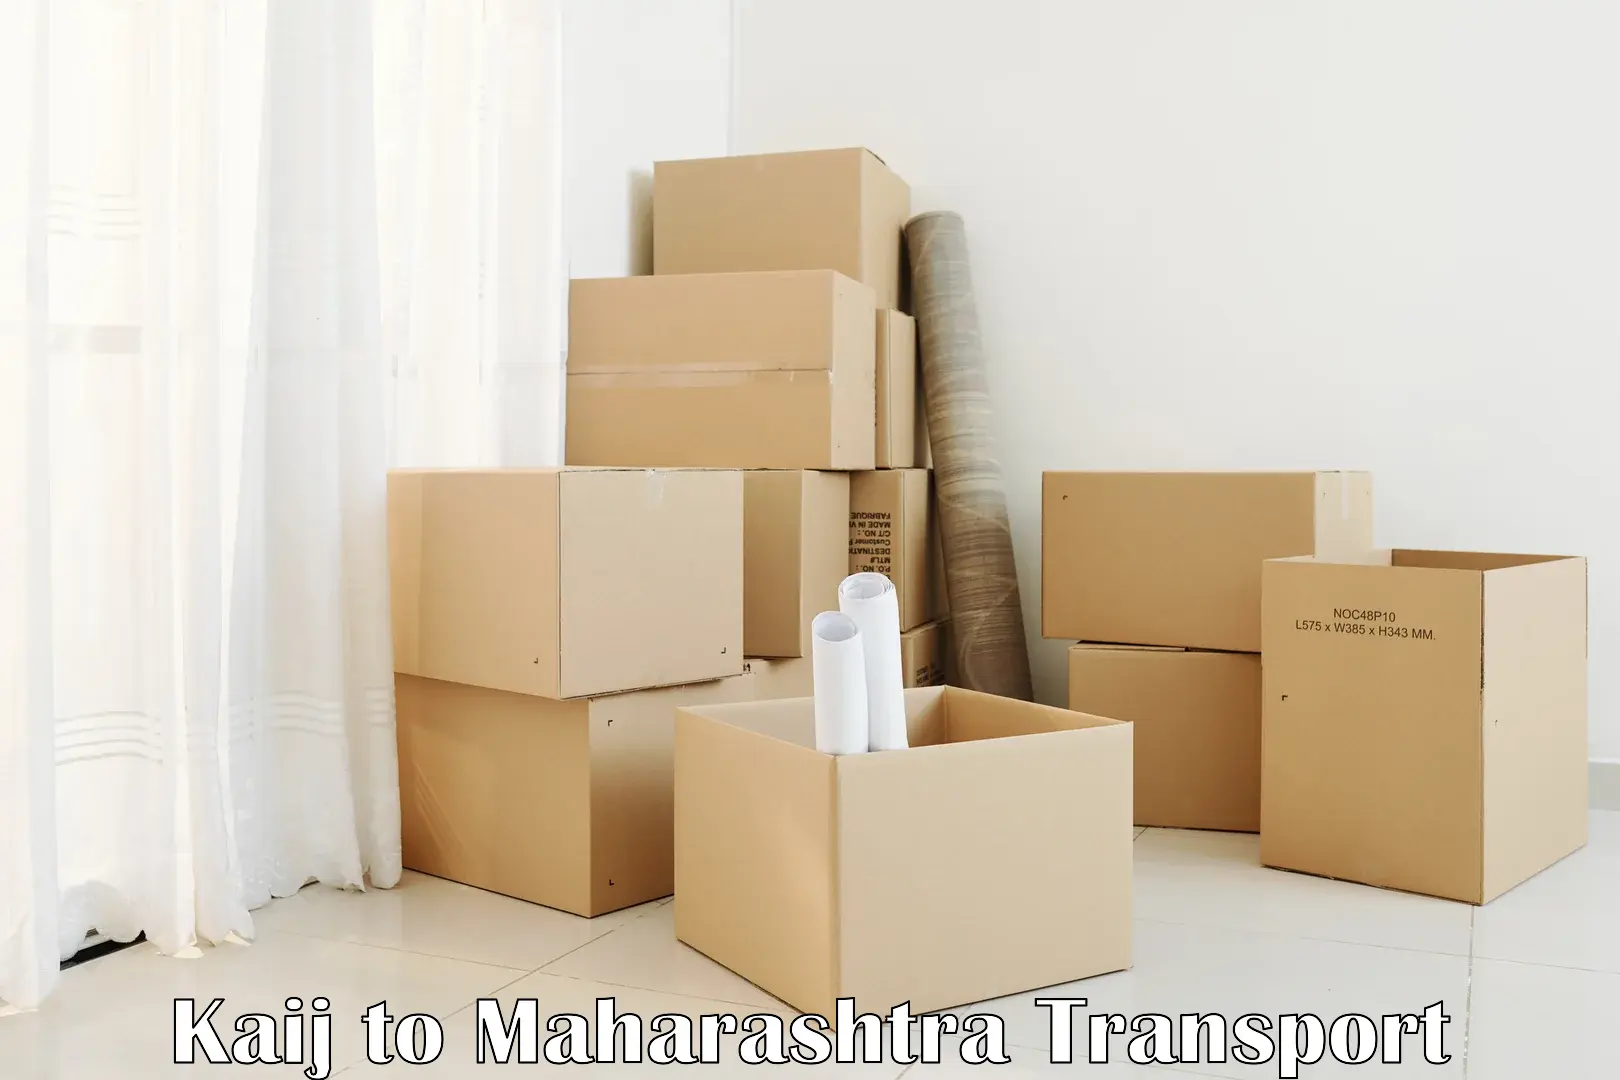 Container transportation services in Kaij to IIT Mumbai